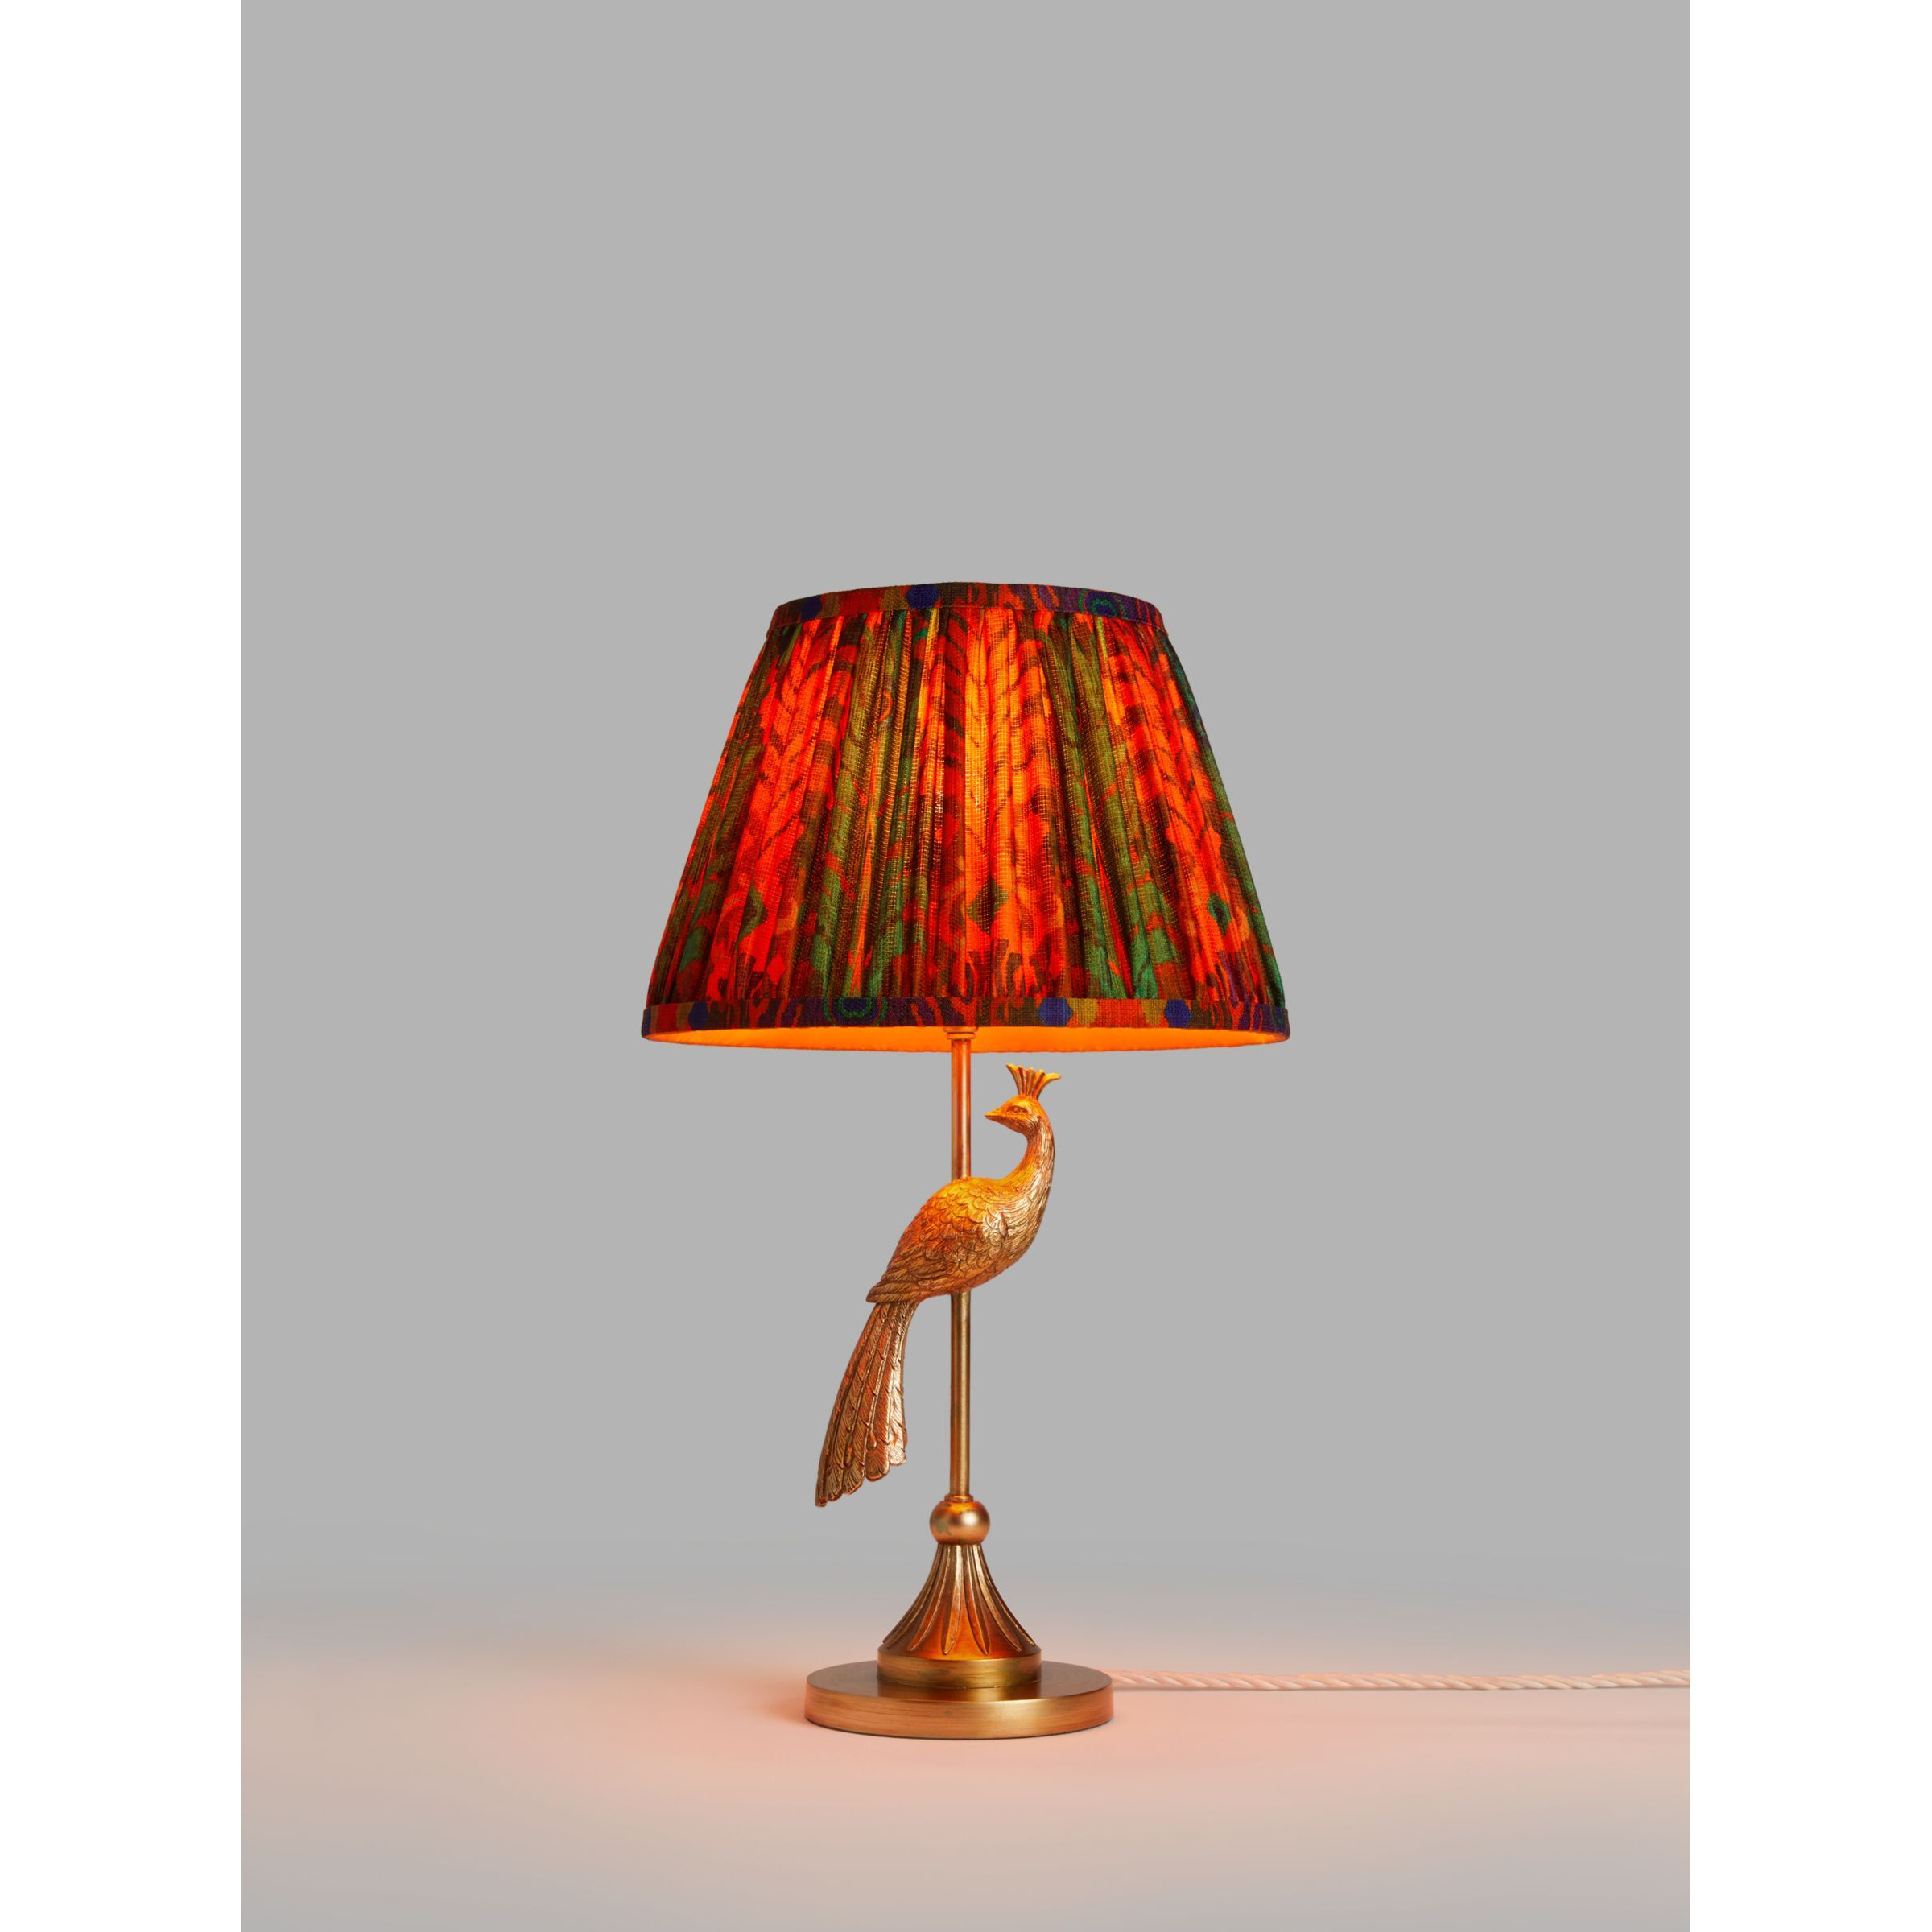 John Lewis + Matthew Williamson Peacock Lamp Base and Peacock Tapered Lampshade, Gold/Red - image 1